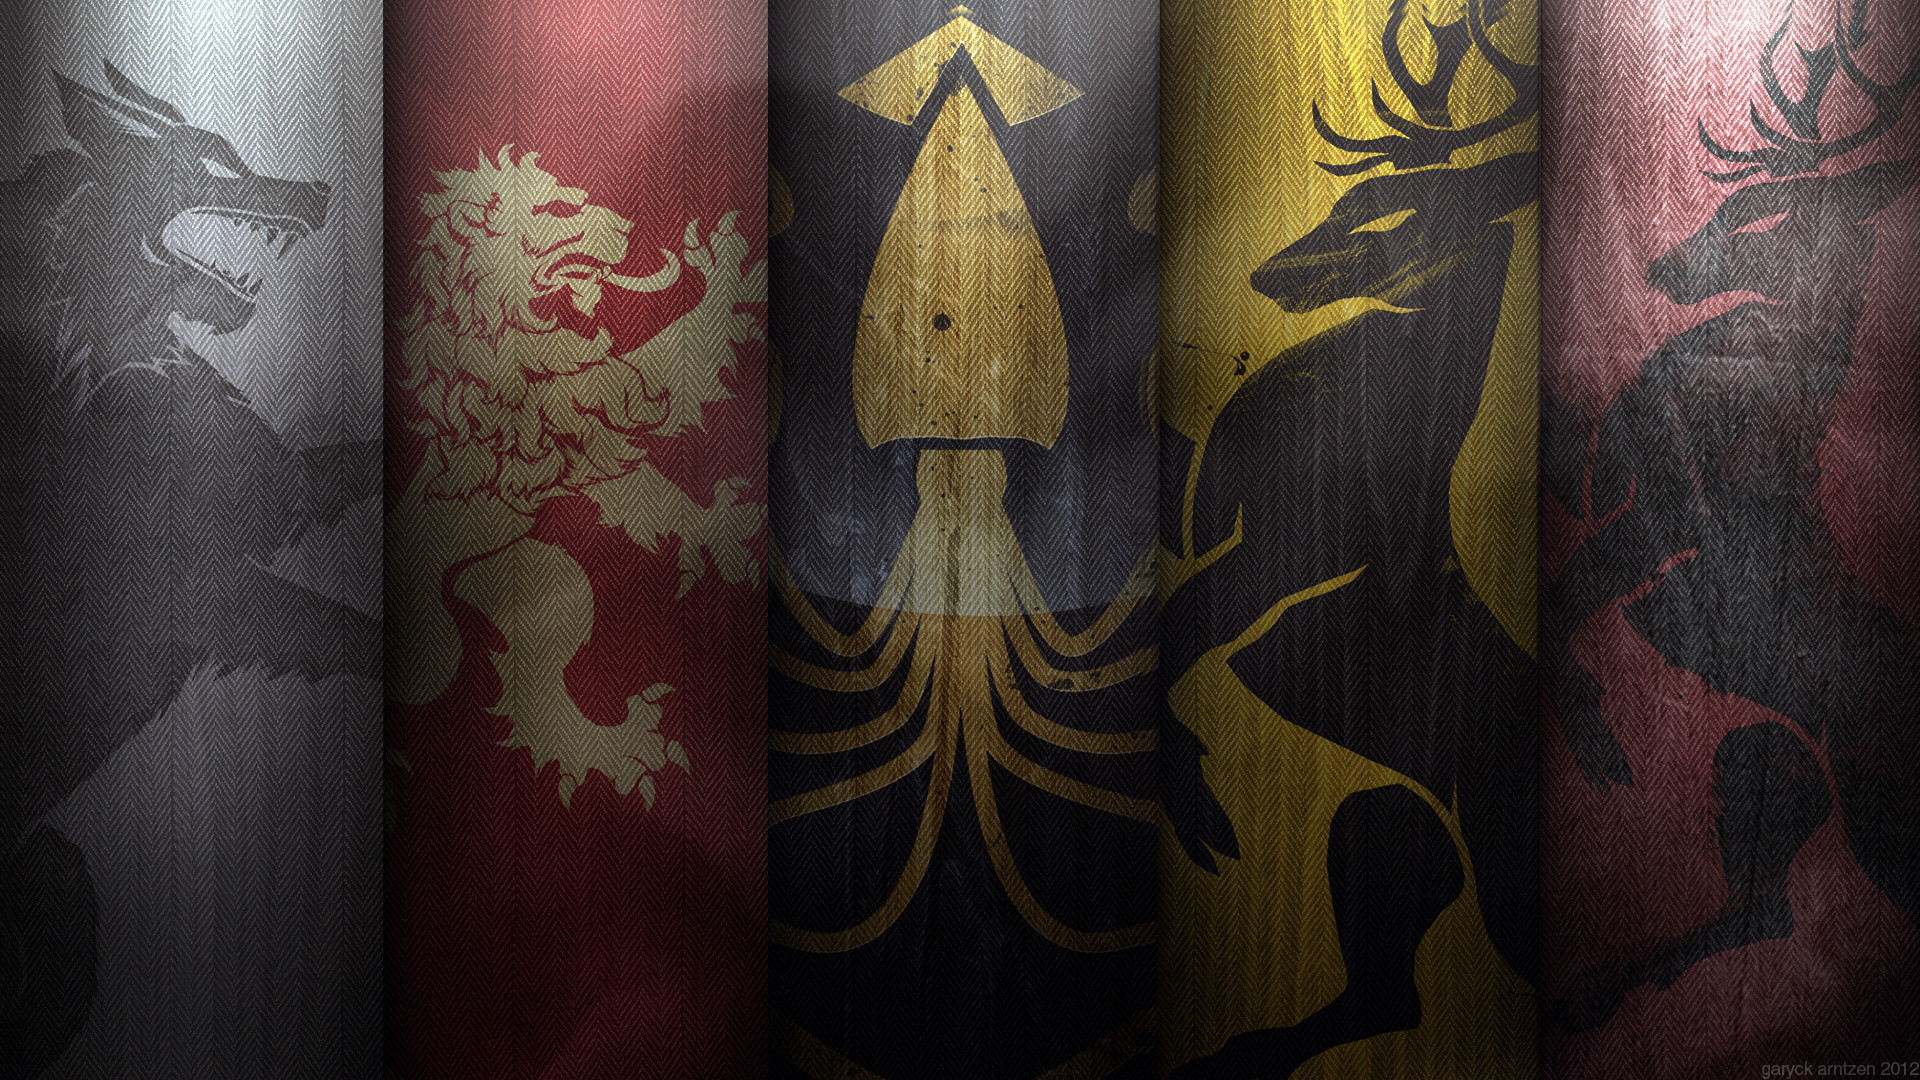 Game of Thrones Wallpaper HD Images